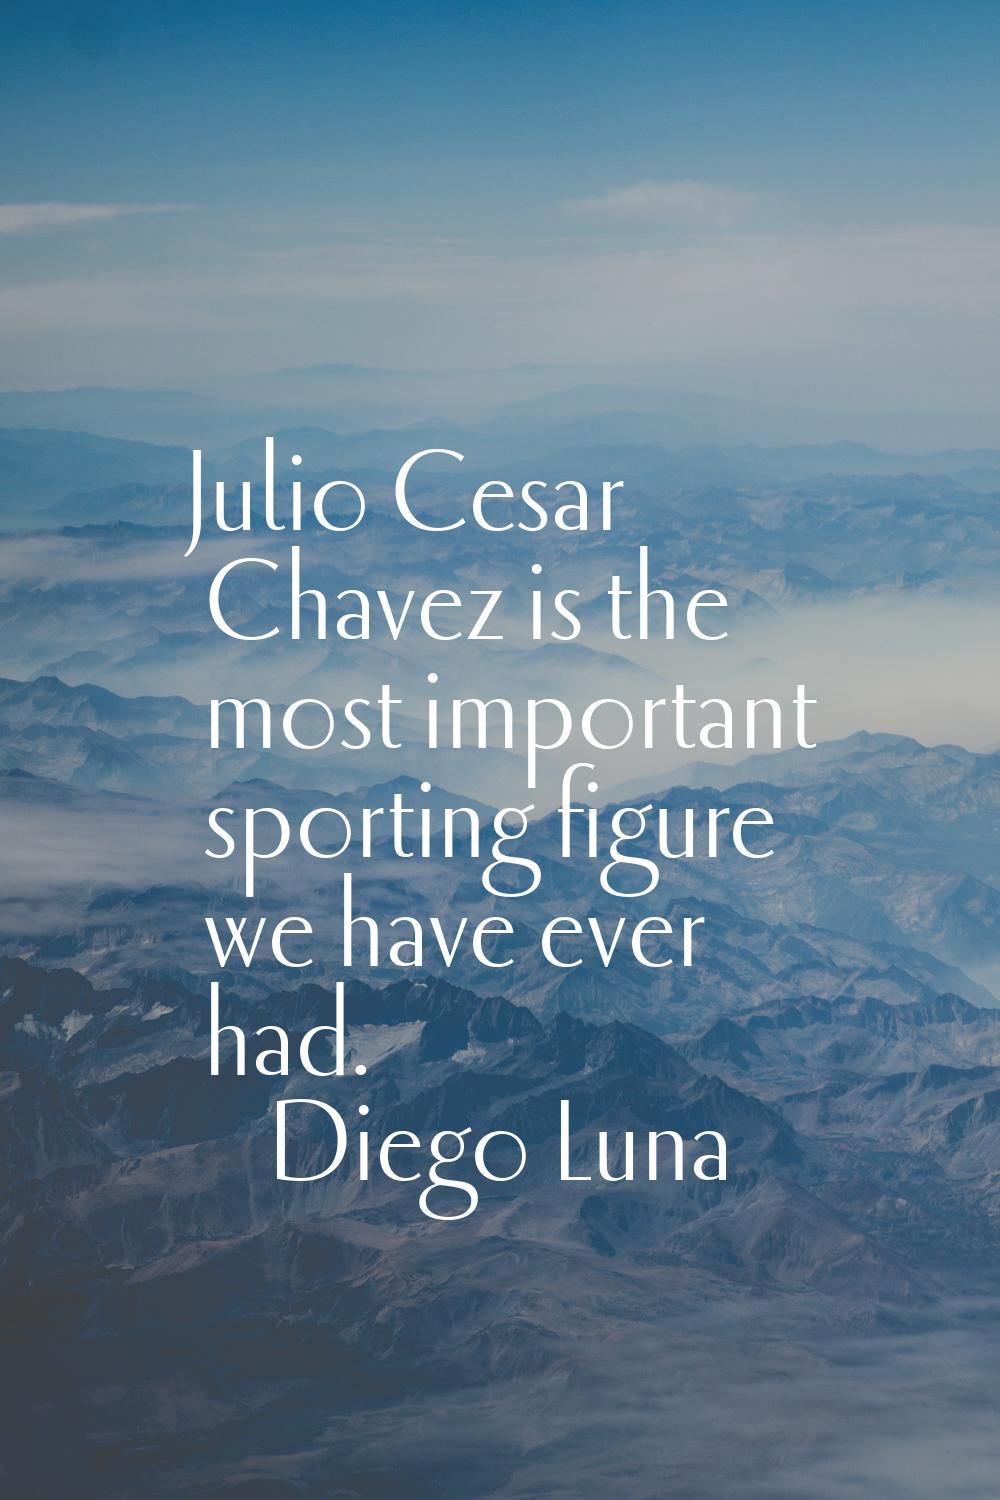 Julio Cesar Chavez is the most important sporting figure we have ever had.